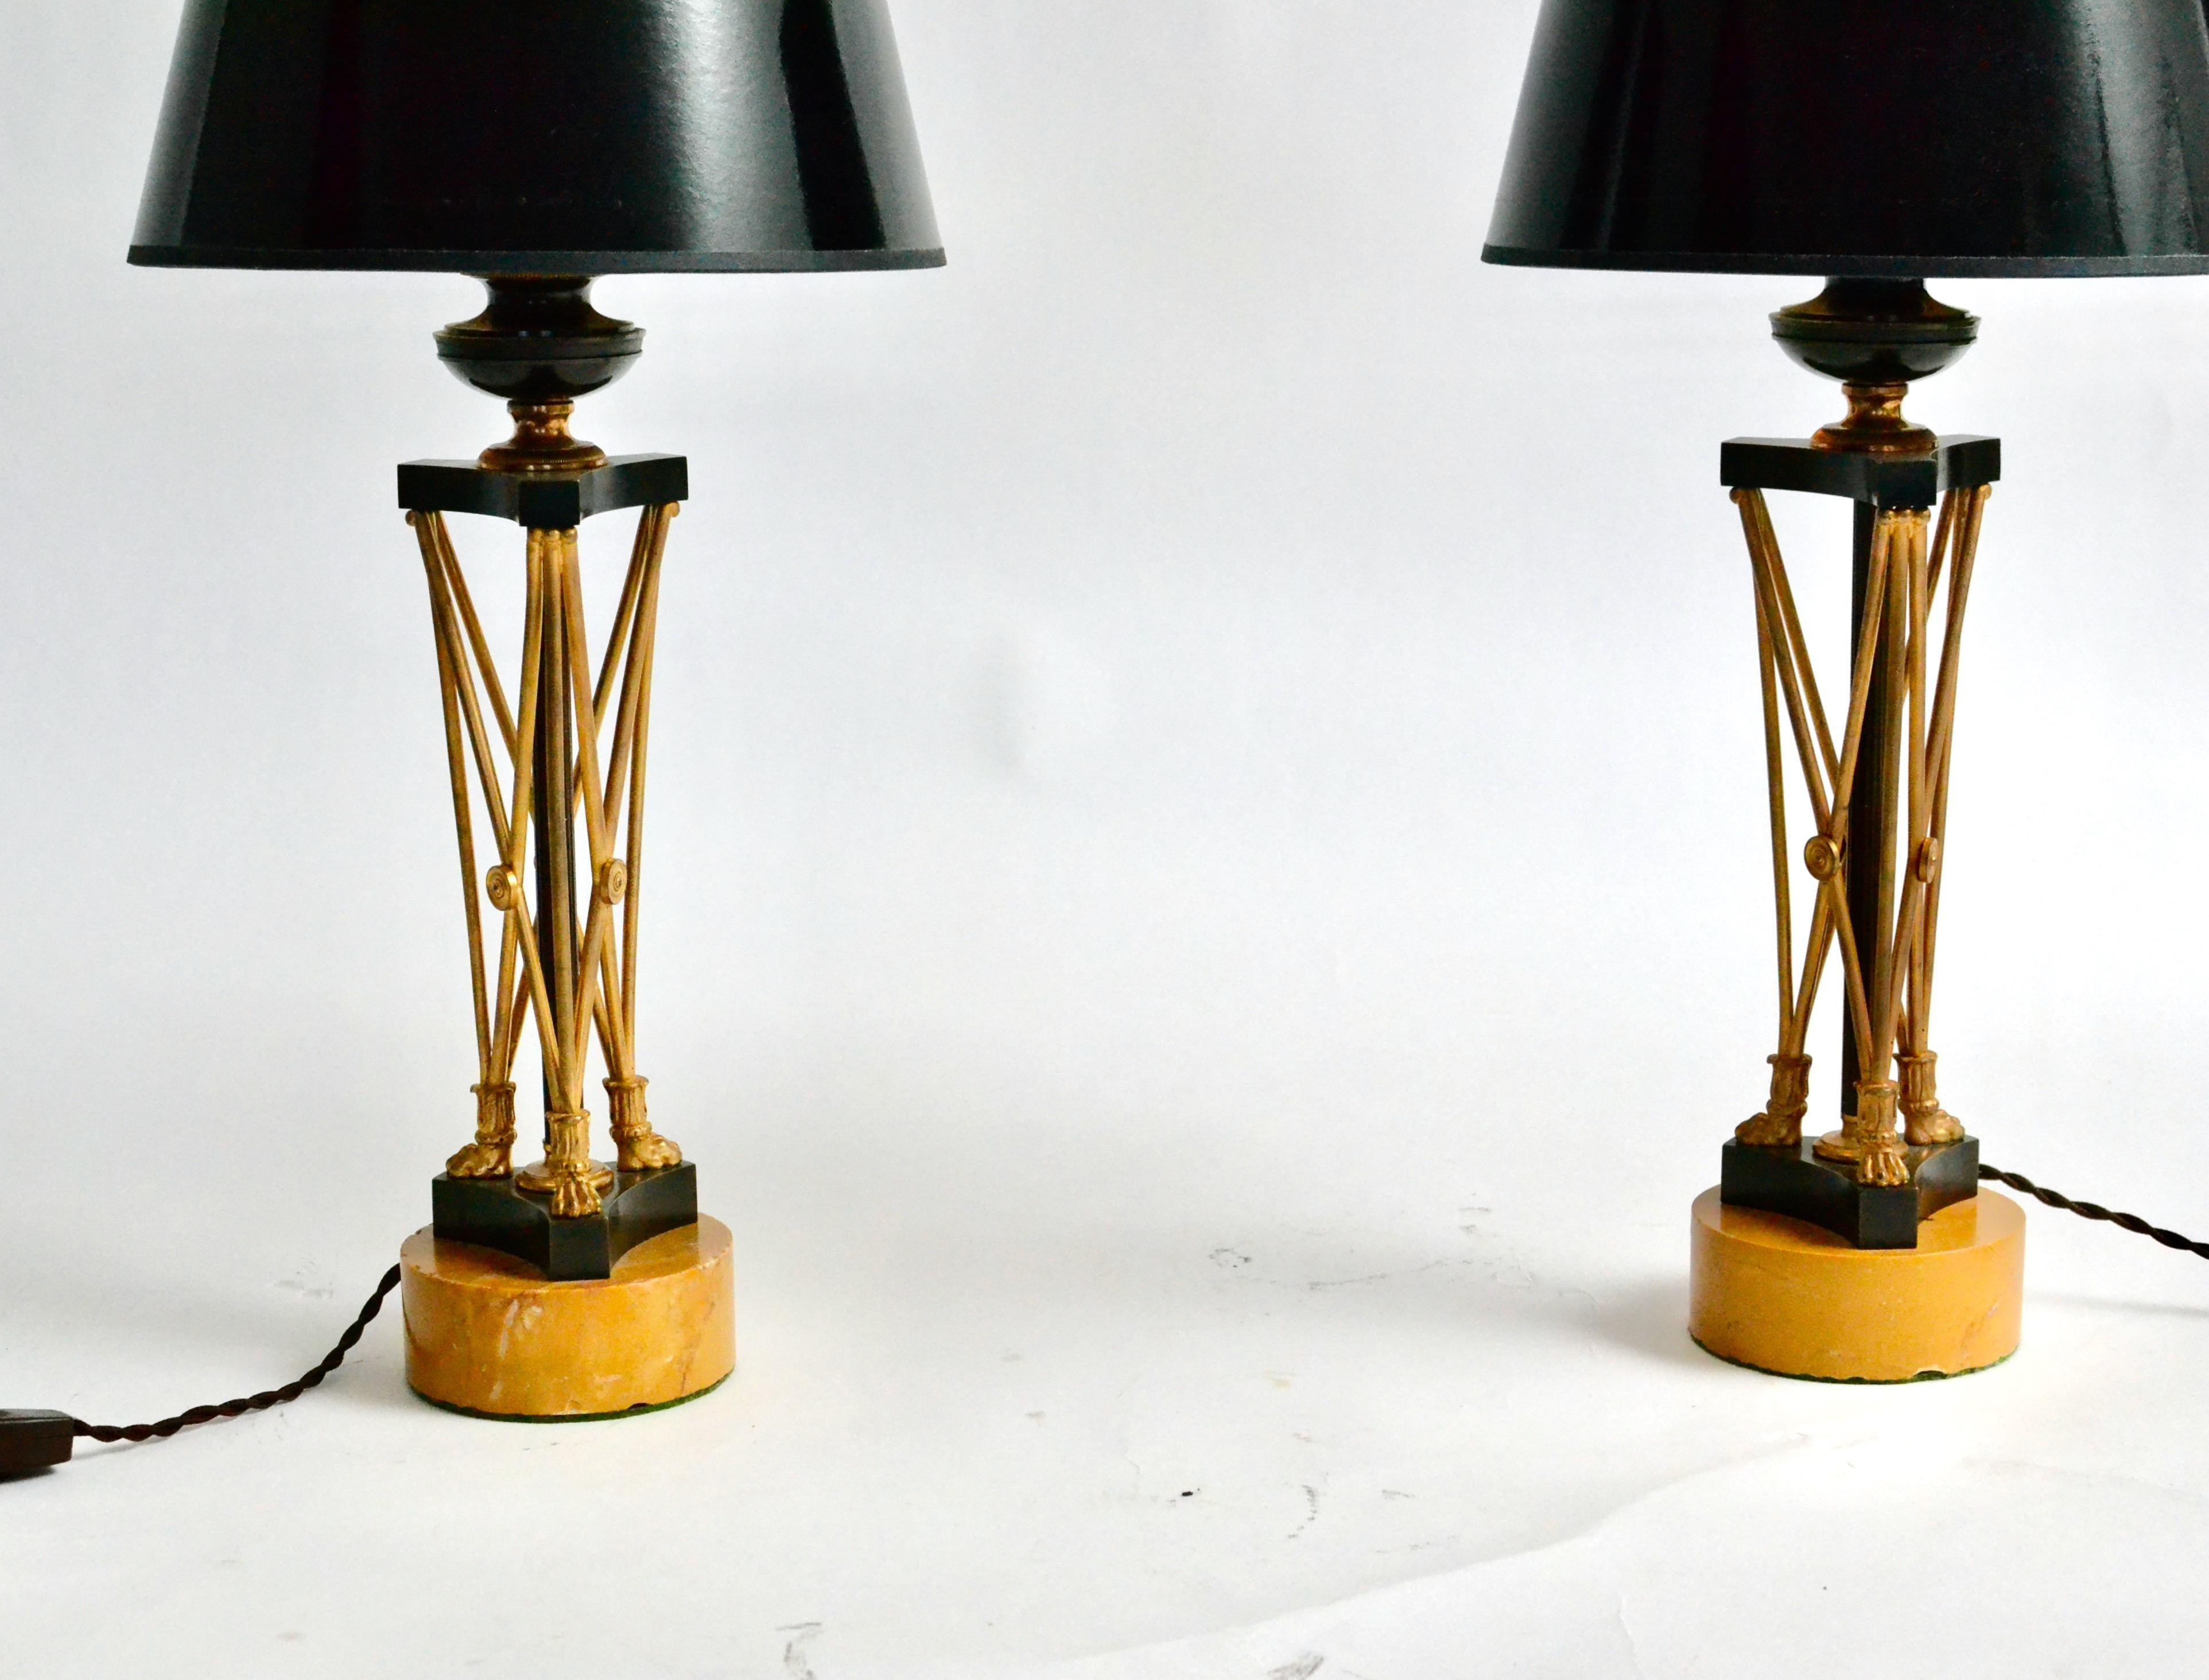 Pair of Regency Gilt and Patinated Bronze Candlesticks, Mounted as Lamps. For Sale 4